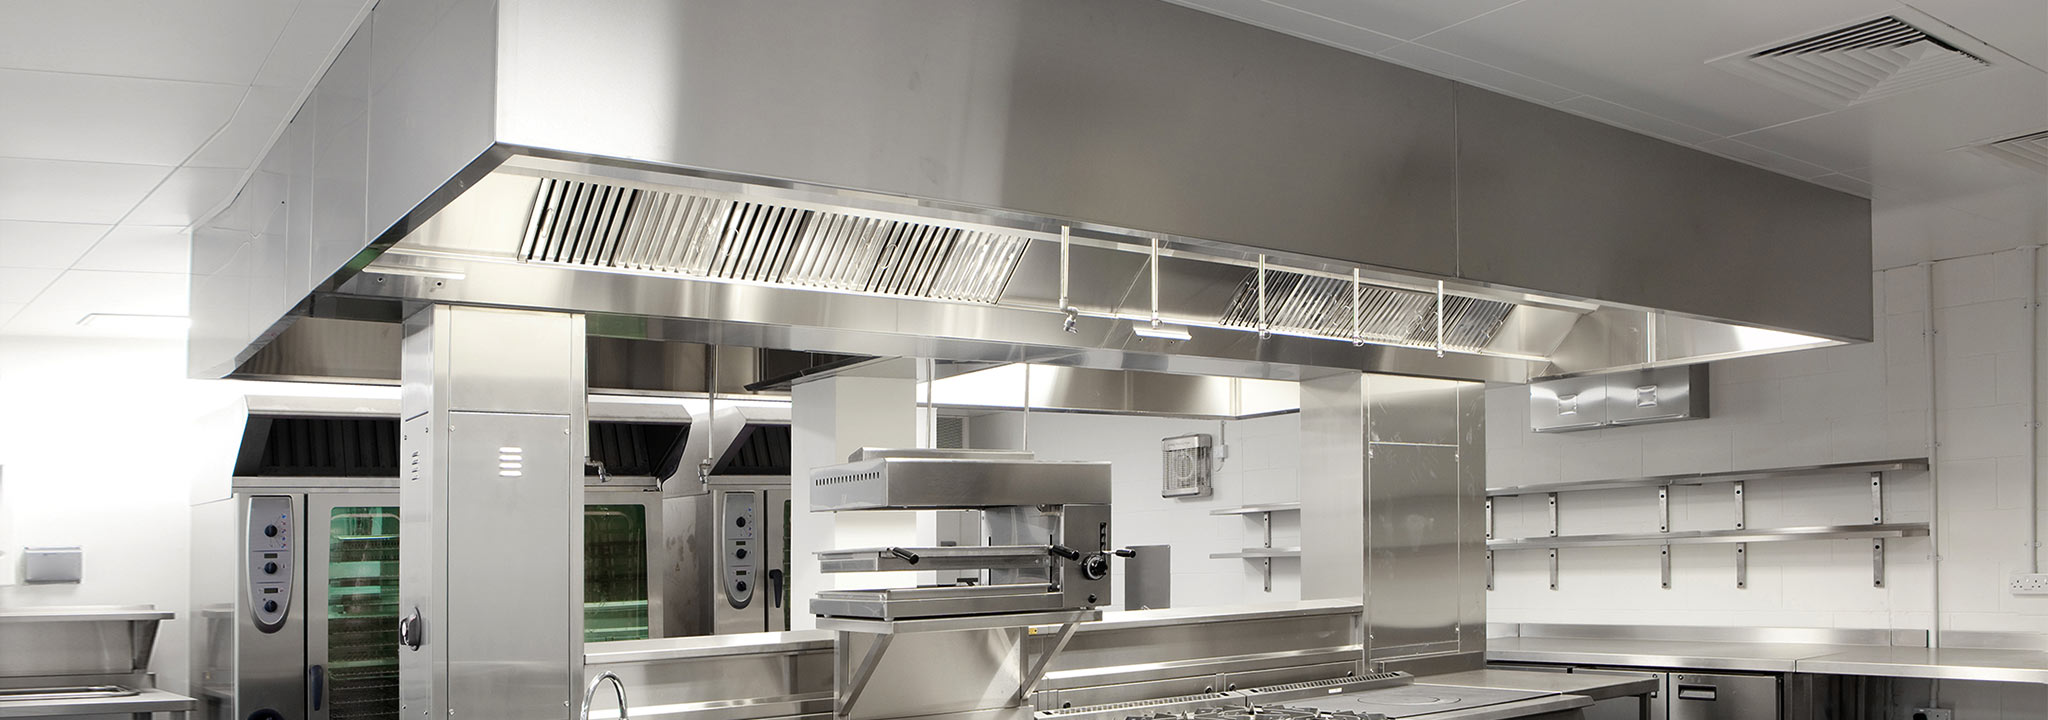 Kitchen Deep Clening and Hood Cleaning Service